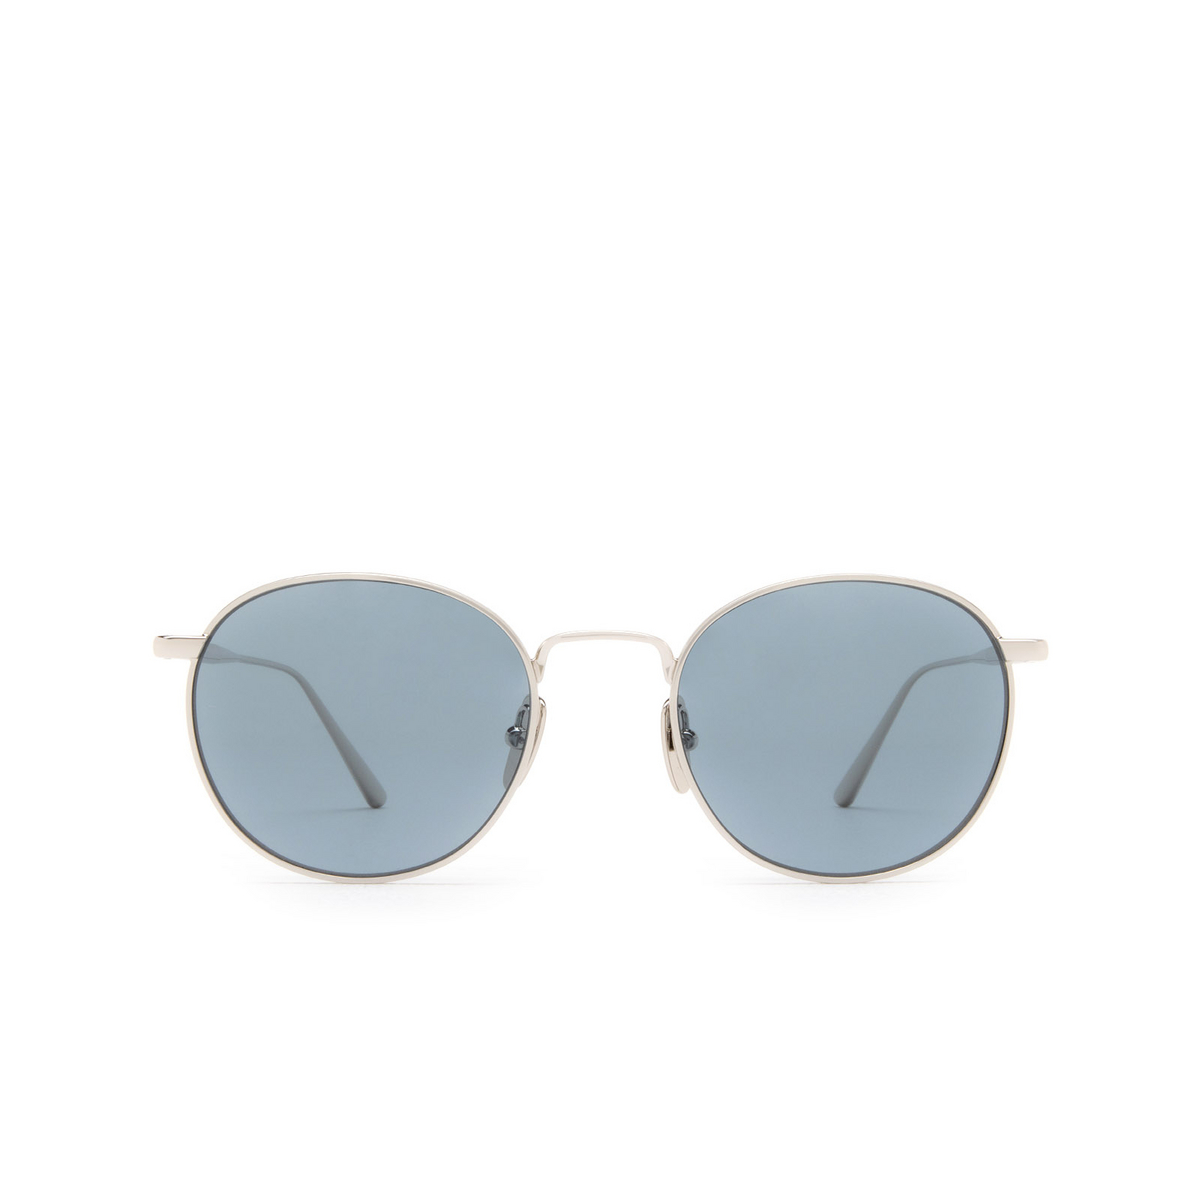 Chimi ROUND Sunglasses BLUE - front view